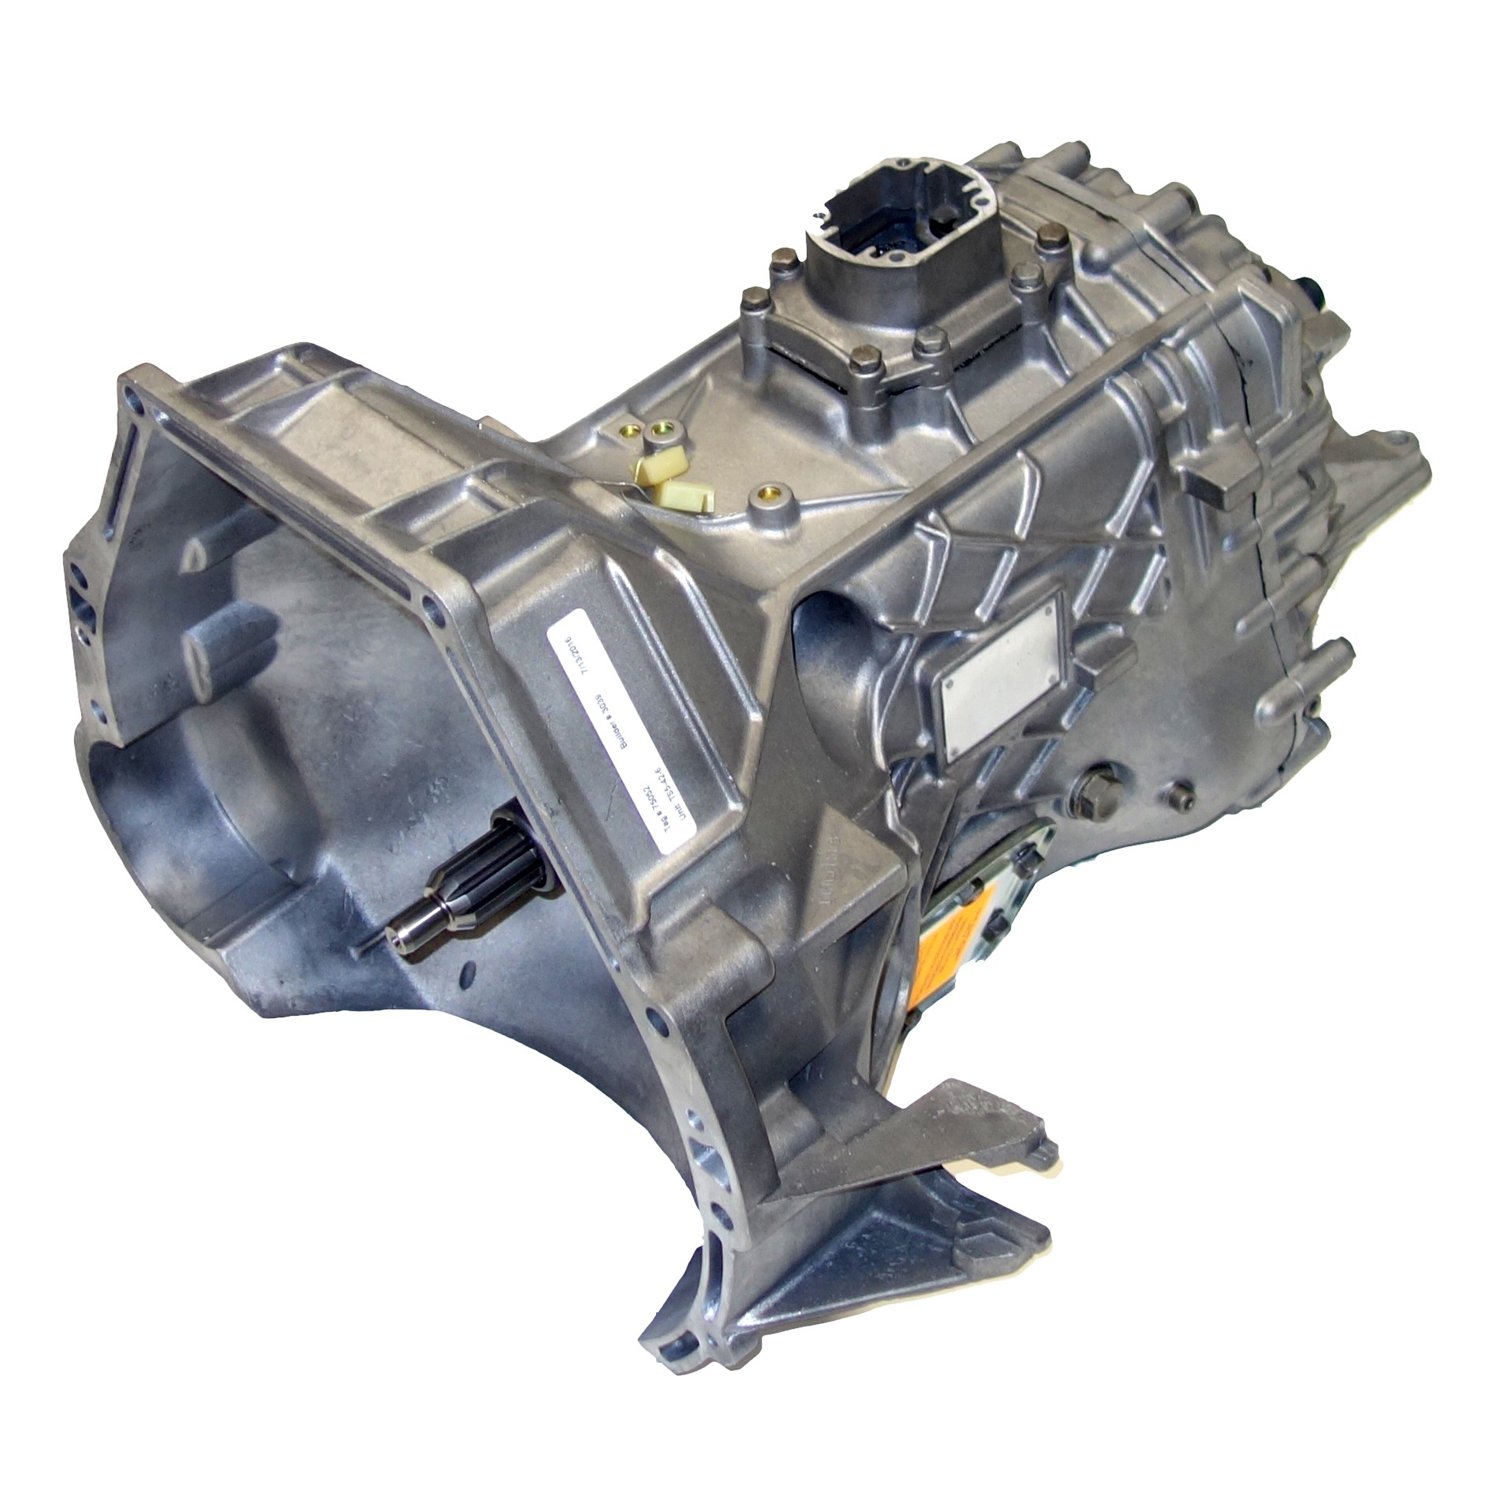 Remanufactured S5-42 Manual Trans for 87-92 F-series 6.9L